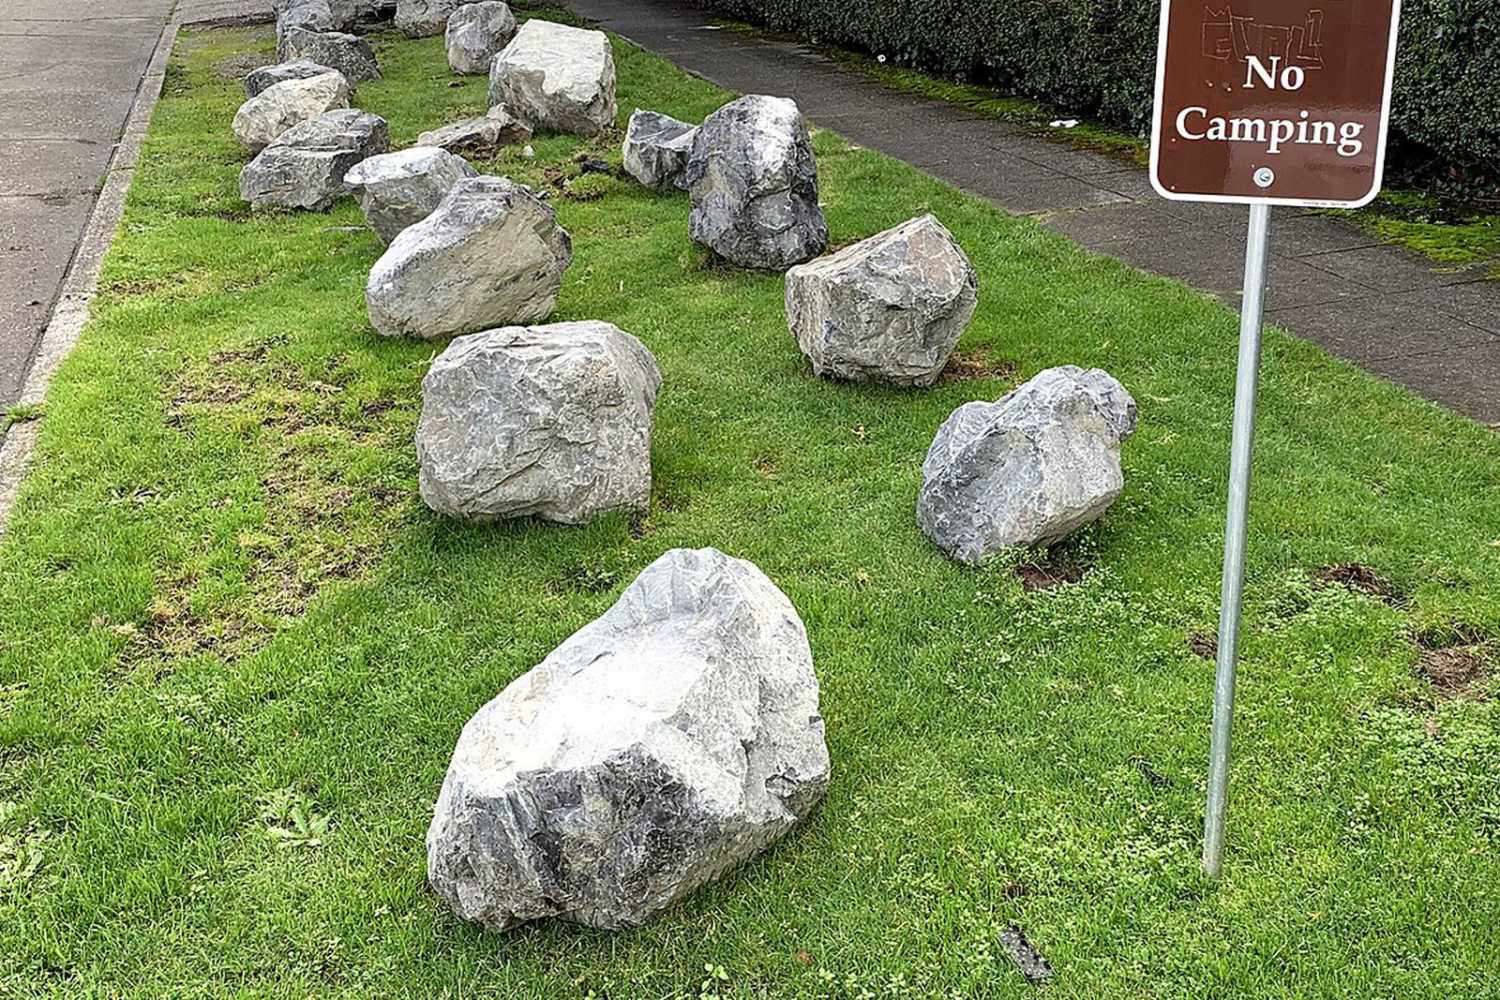 Rocks on a lawn to stop camping. Credit: Andrew Kvalheim on Wikimedia Commons